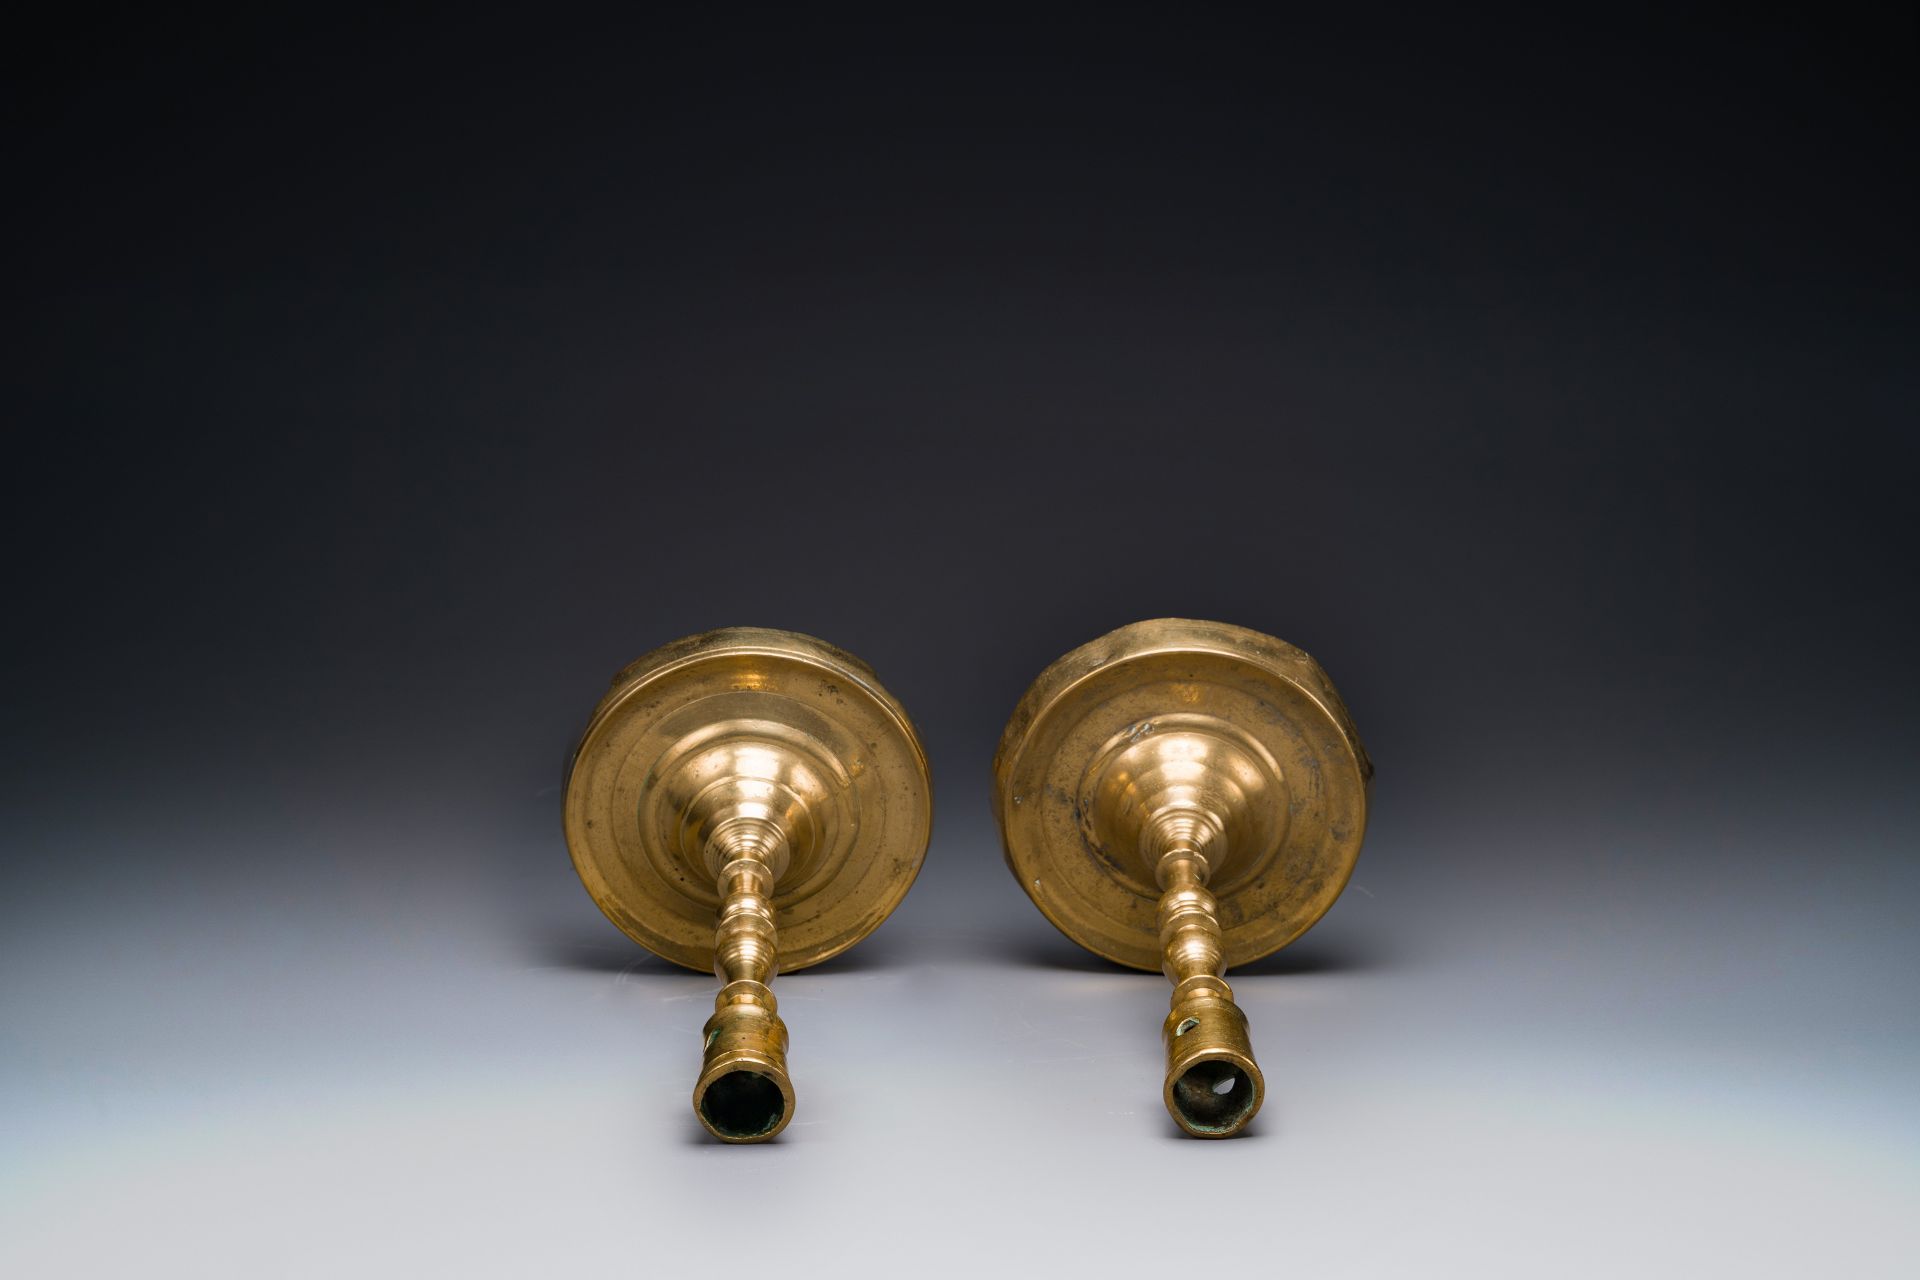 A pair of Flemish or Dutch knotted bronze candlesticks, 16th C. - Image 3 of 8